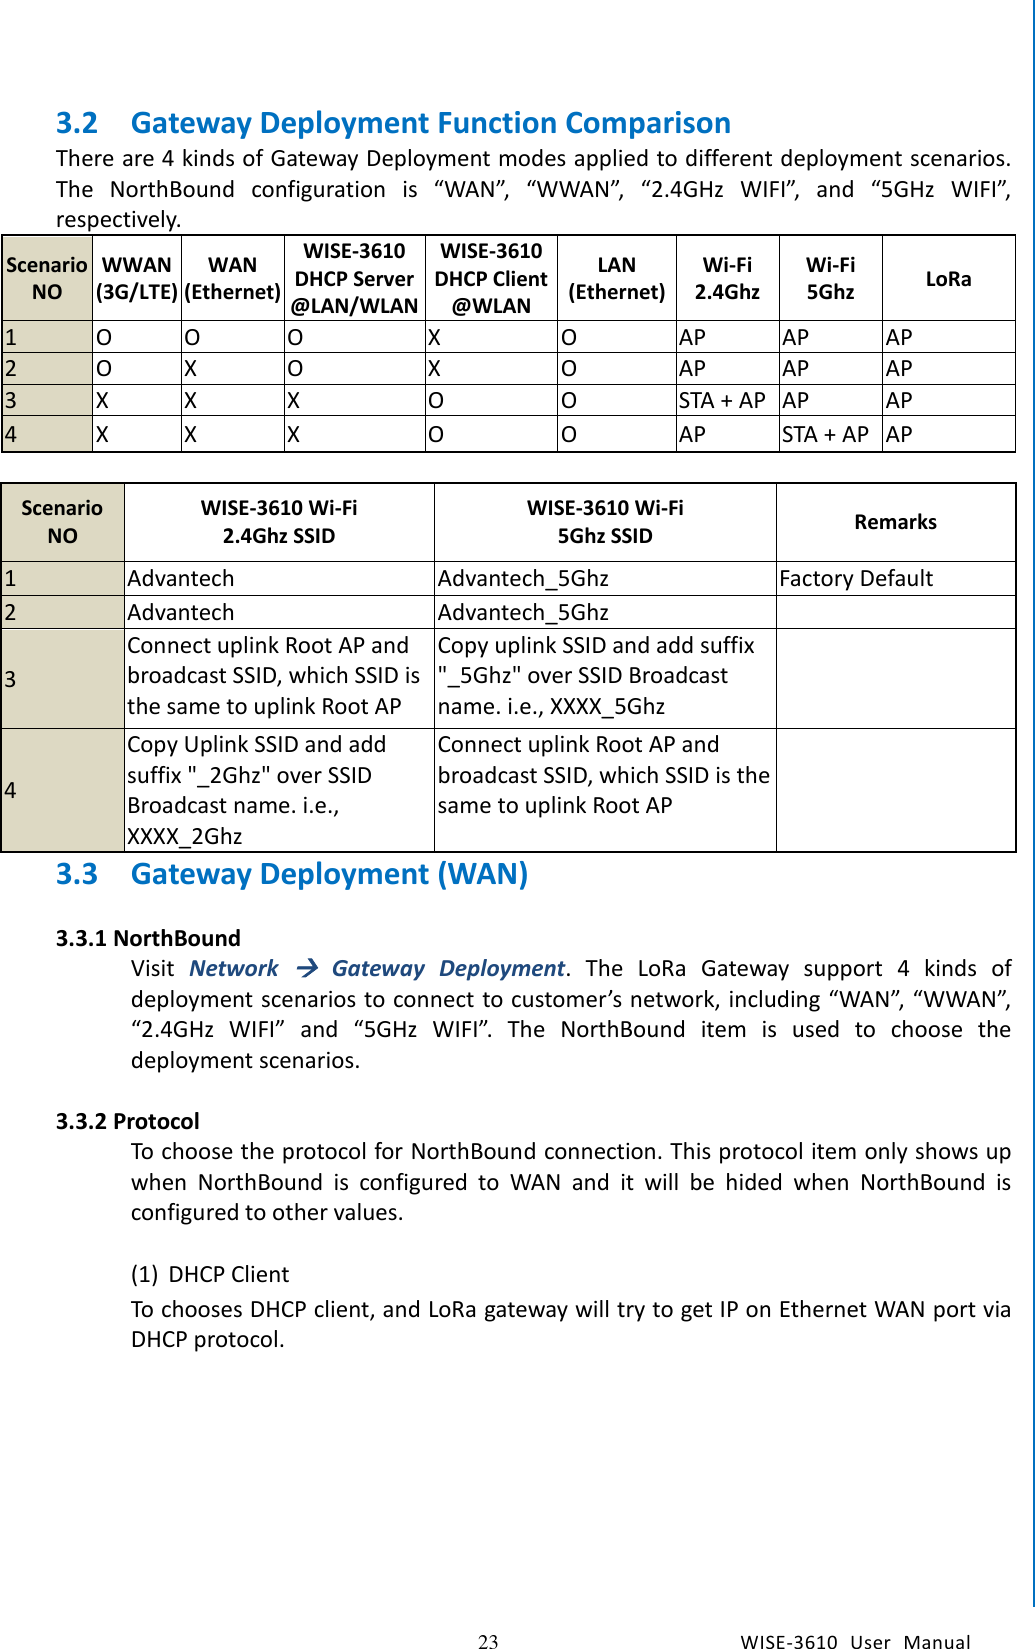   23 WISE-3610  User  Manual  Chapter5    Advantech Services 3.2 Gateway Deployment Function Comparison There are 4 kinds of Gateway Deployment modes applied to different deployment scenarios. The  NorthBound  configuration  is  “WAN”,  “WWAN”,  “2.4GHz  WIFI”,  and  “5GHz  WIFI”, respectively. Scenario NO WWAN (3G/LTE) WAN (Ethernet) WISE-3610 DHCP Server @LAN/WLAN WISE-3610 DHCP Client @WLAN LAN (Ethernet) Wi-Fi 2.4Ghz Wi-Fi 5Ghz LoRa 1 O O O X O AP AP   AP 2 O X O X O AP   AP AP 3 X X X O O STA + AP AP AP 4 X X X O O AP STA + AP AP  Scenario NO WISE-3610 Wi-Fi   2.4Ghz SSID WISE-3610 Wi-Fi   5Ghz SSID Remarks 1 Advantech Advantech_5Ghz Factory Default 2 Advantech Advantech_5Ghz   3 Connect uplink Root AP and broadcast SSID, which SSID is the same to uplink Root AP Copy uplink SSID and add suffix &quot;_5Ghz&quot; over SSID Broadcast name. i.e., XXXX_5Ghz   4 Copy Uplink SSID and add suffix &quot;_2Ghz&quot; over SSID Broadcast name. i.e., XXXX_2Ghz Connect uplink Root AP and broadcast SSID, which SSID is the same to uplink Root AP   3.3 Gateway Deployment (WAN)  3.3.1 NorthBound Visit  Network   Gateway  Deployment.  The  LoRa  Gateway  support  4  kinds  of deployment scenarios to connect to customer’s network, including “WAN”, “WWAN”, “2.4GHz  WIFI”  and  “5GHz  WIFI”.  The  NorthBound  item  is  used  to  choose  the deployment scenarios.    3.3.2 Protocol To choose the protocol for NorthBound connection. This protocol item only shows up when  NorthBound  is  configured  to  WAN  and  it  will  be  hided  when  NorthBound  is configured to other values.    (1) DHCP Client To chooses DHCP client, and LoRa gateway will try to get IP on Ethernet WAN port via DHCP protocol.  